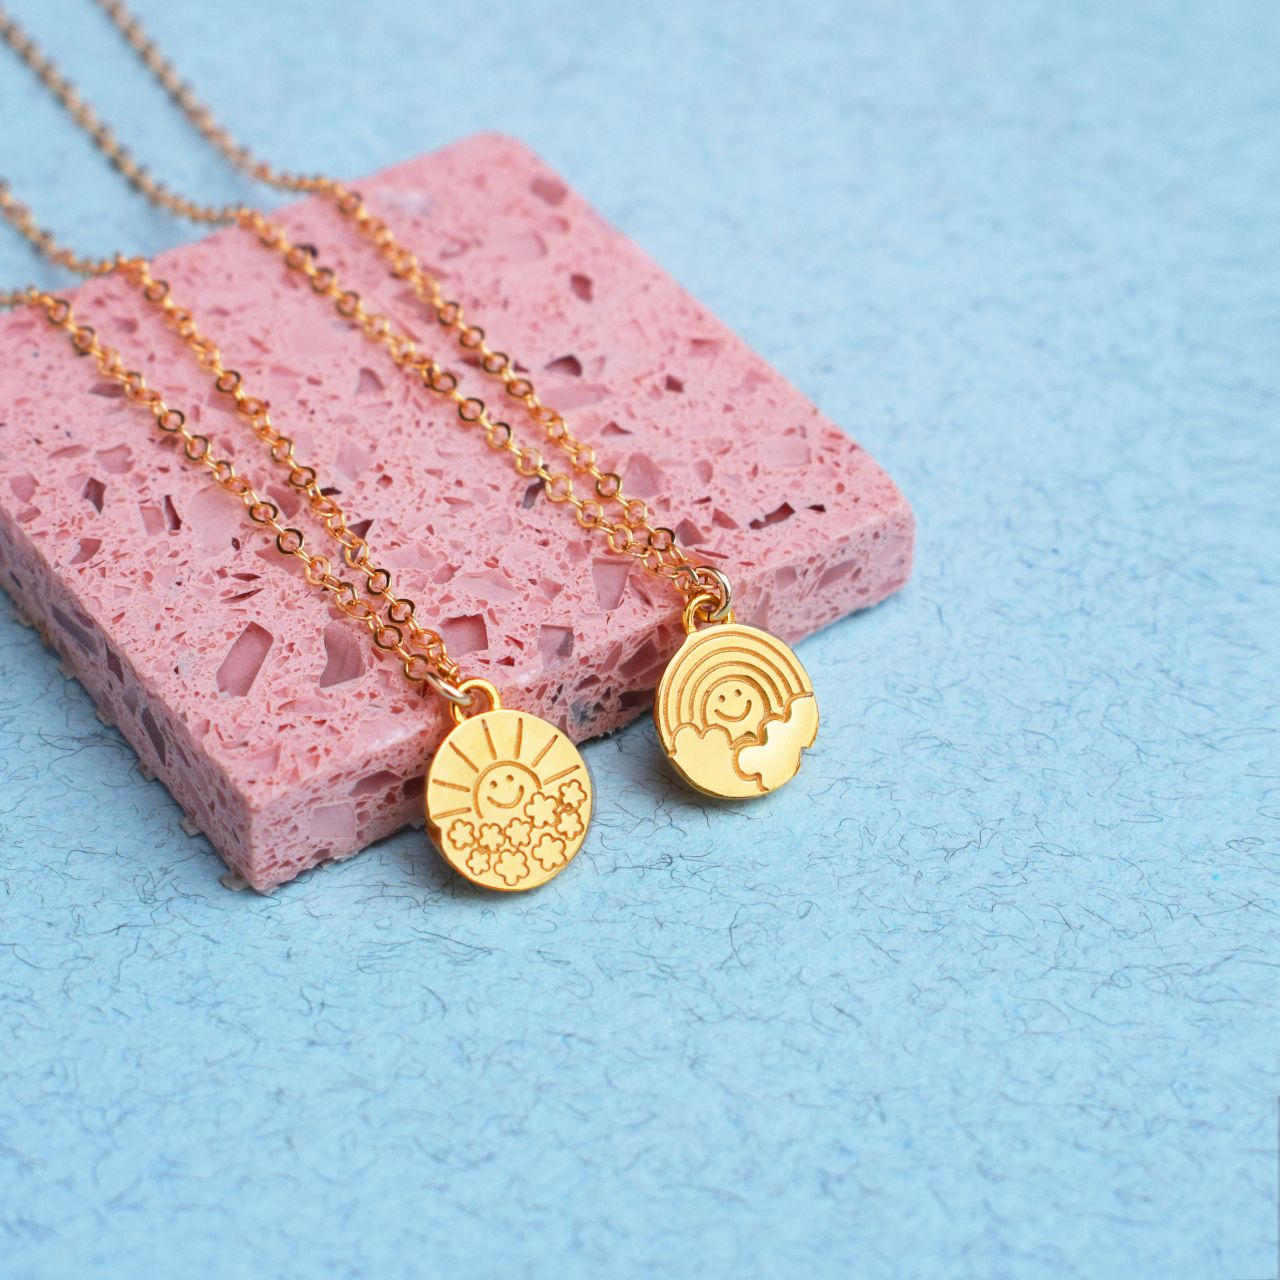 10 Handmade Jewelry Trends to Follow in 2023. It's a good year!